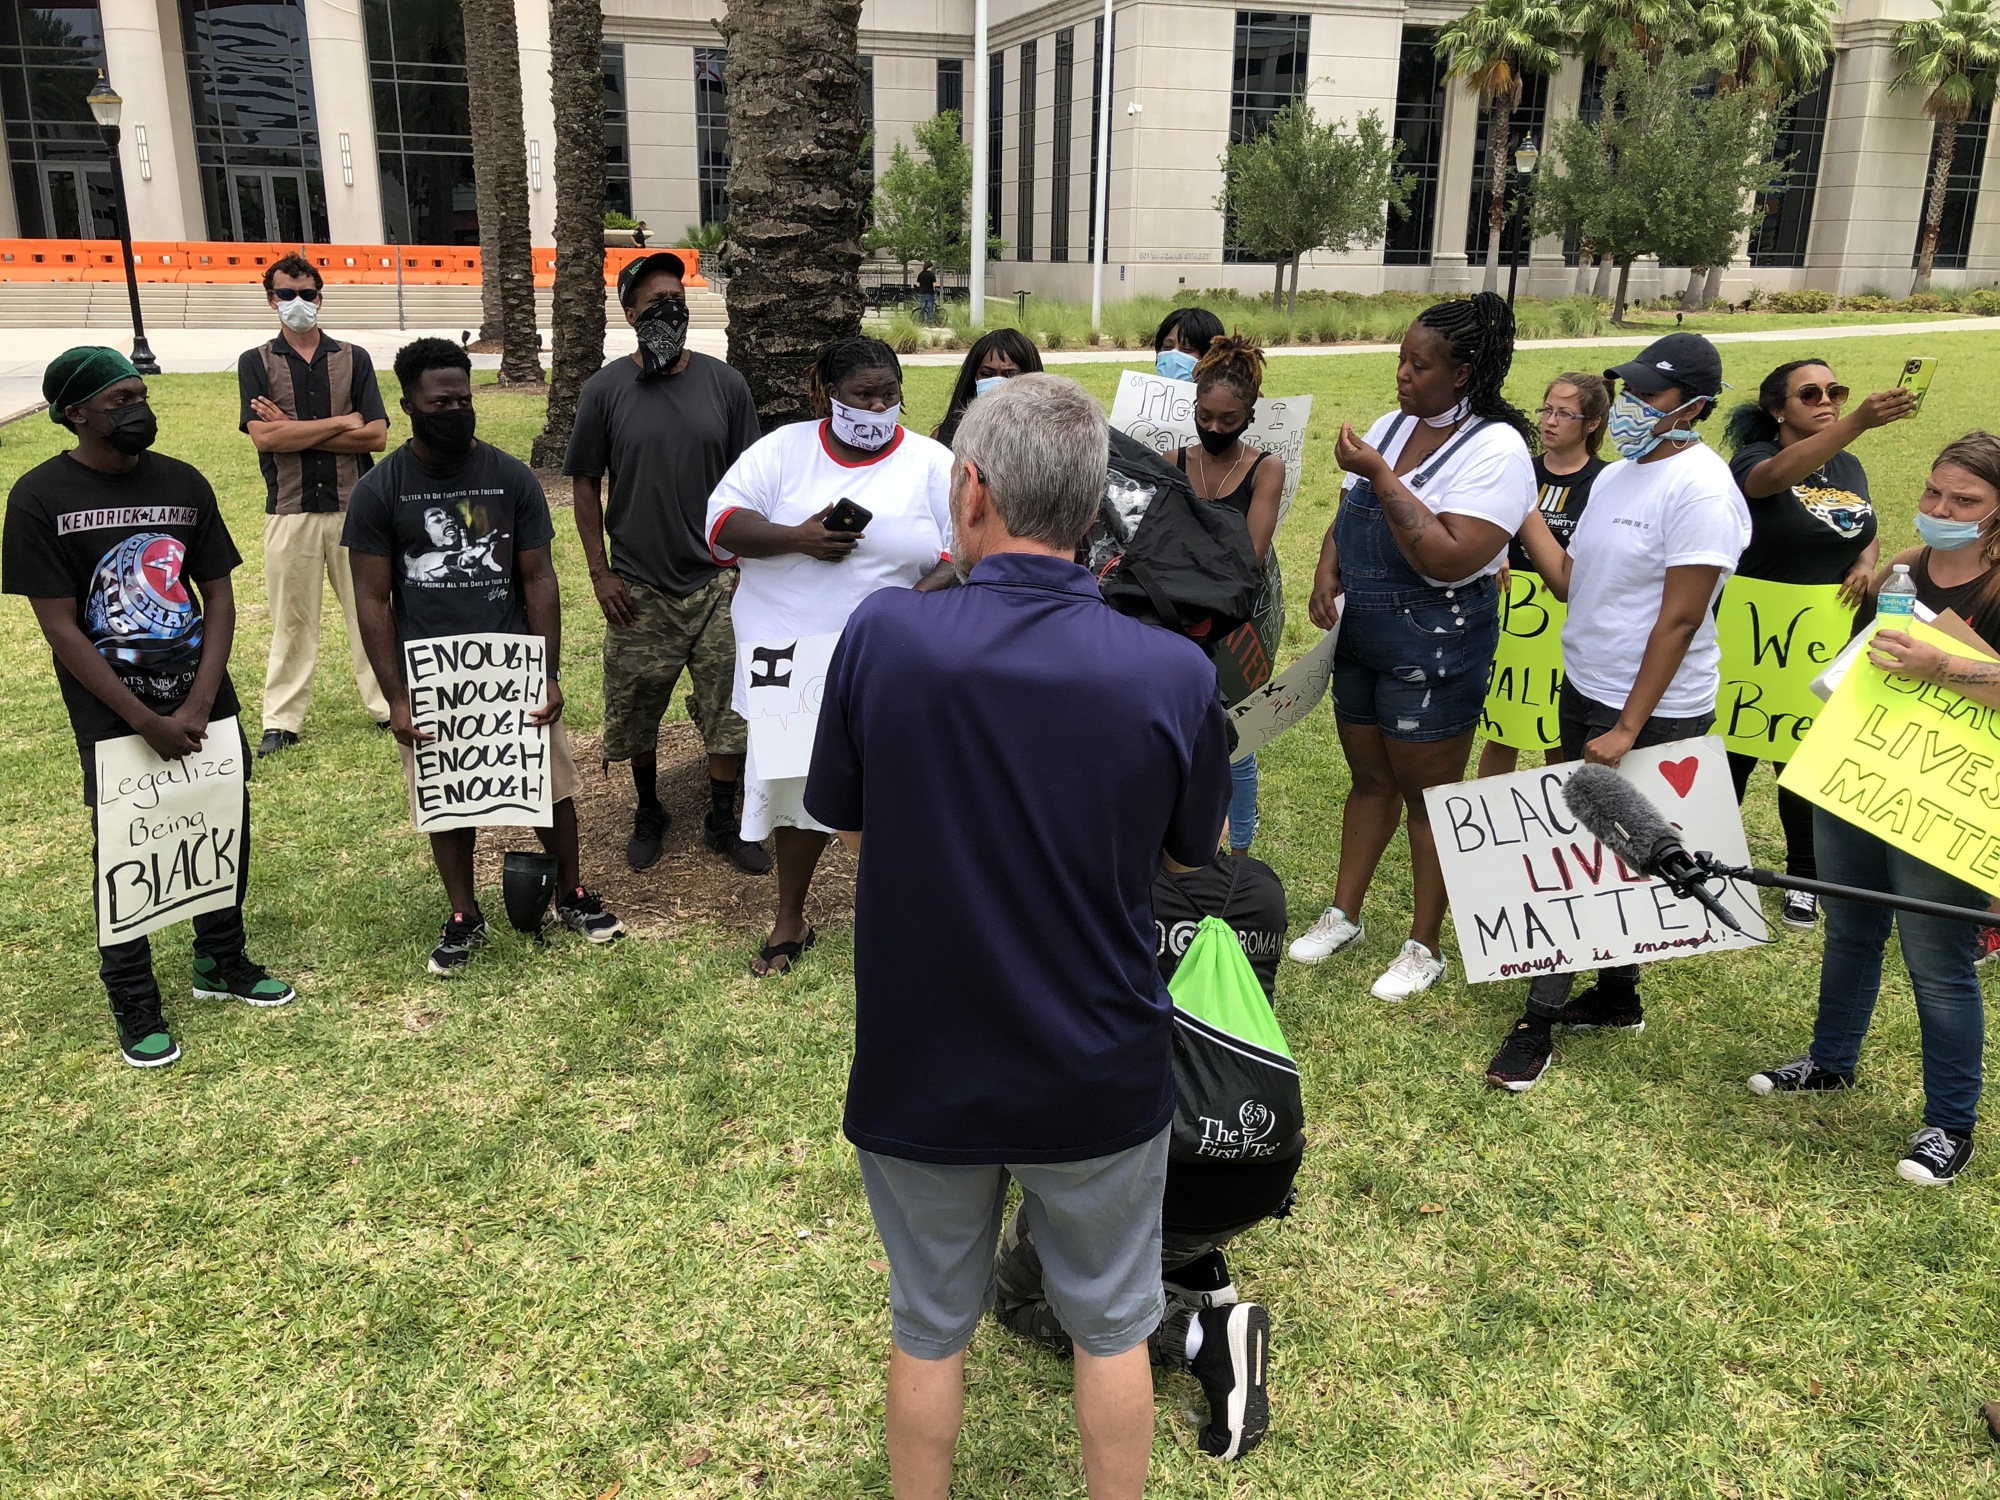 About 50 protestors gathered at noon on the steps of the Duval County Courthouse. (Mike Mendenhall)